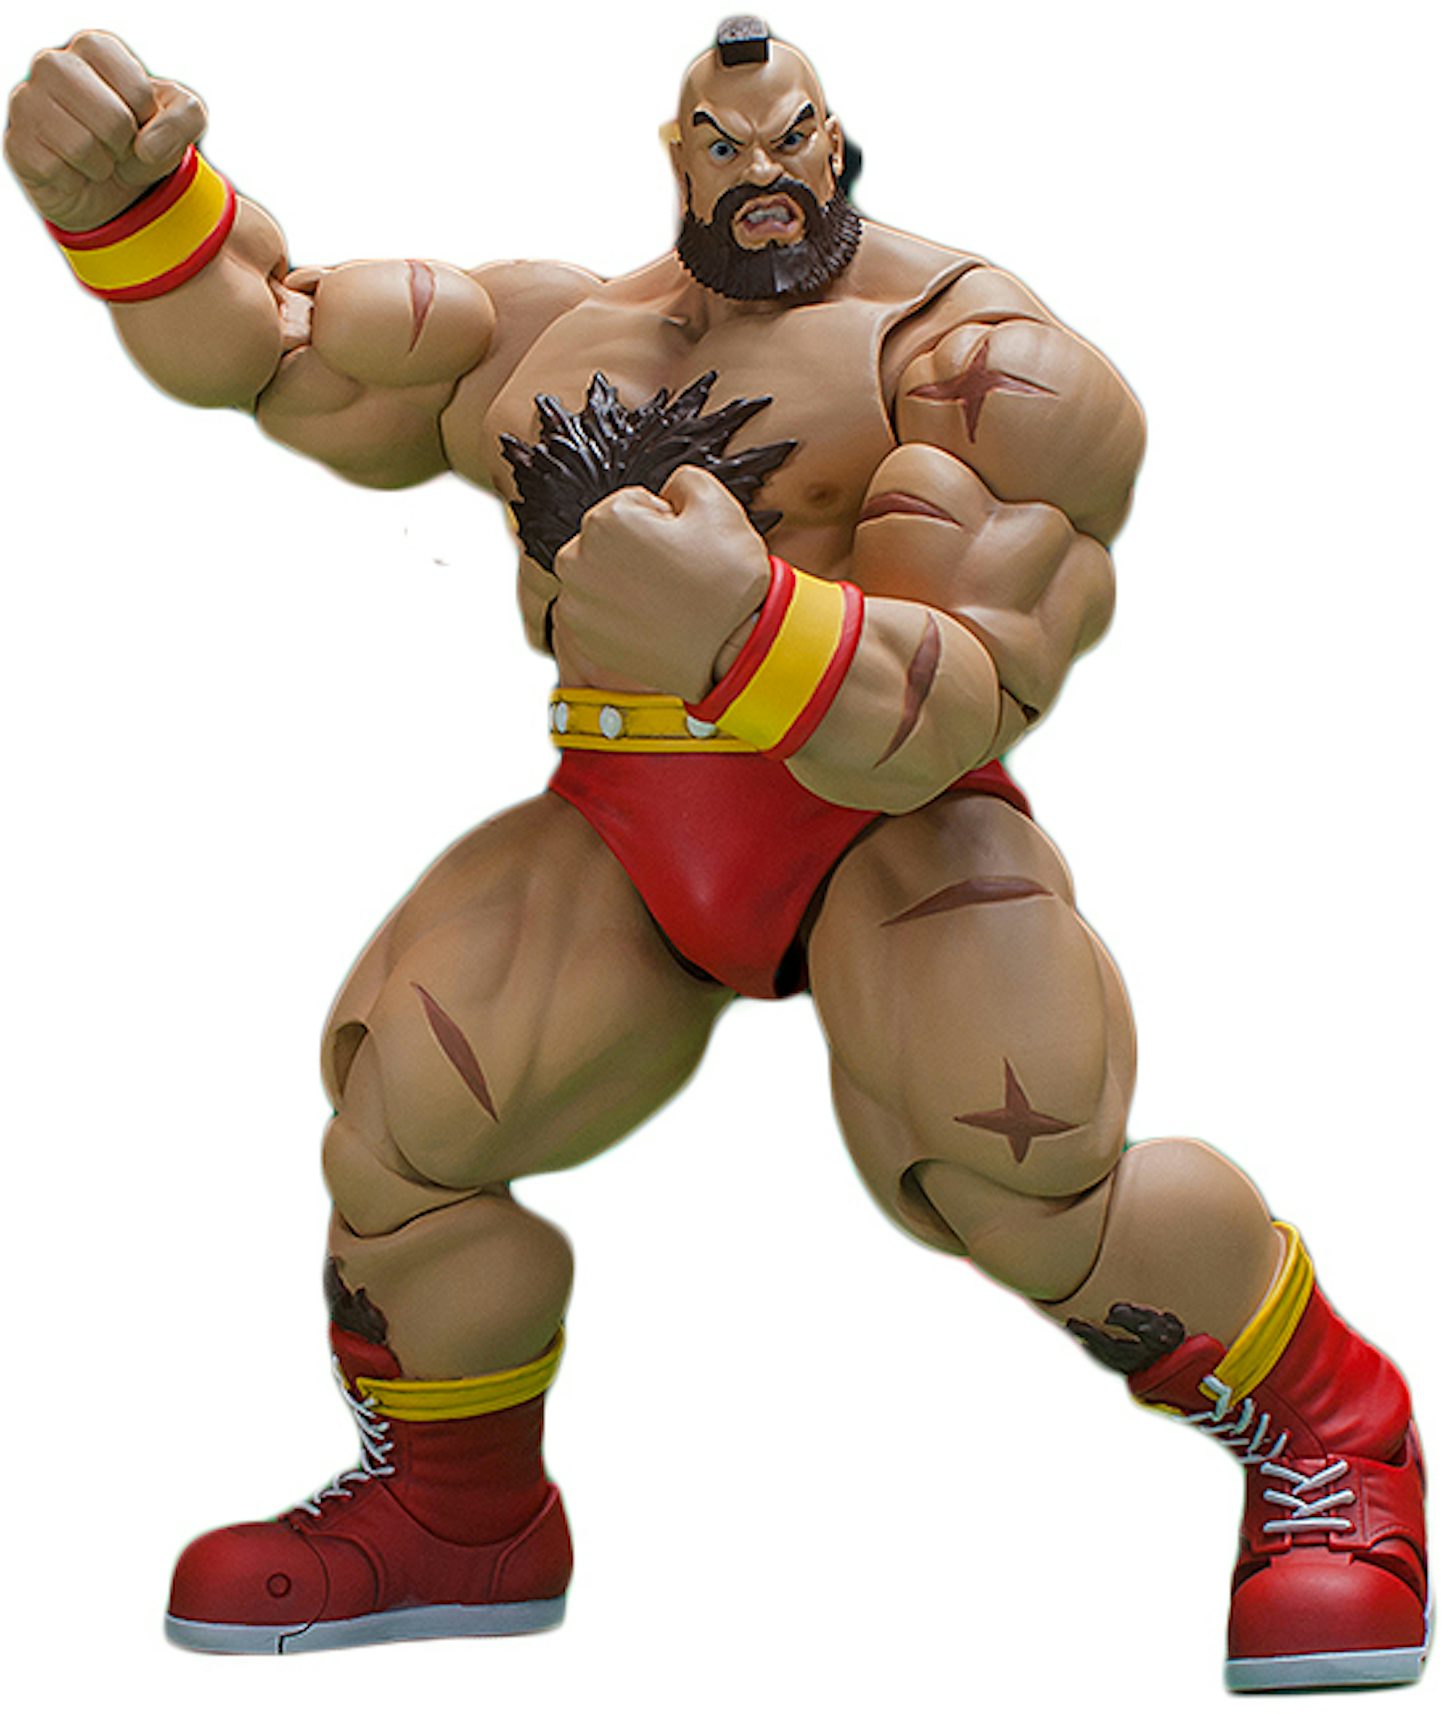 Storm Collectibles Ultimate Street Fighter II The Final Challenger Zangief  Action Figure Tan